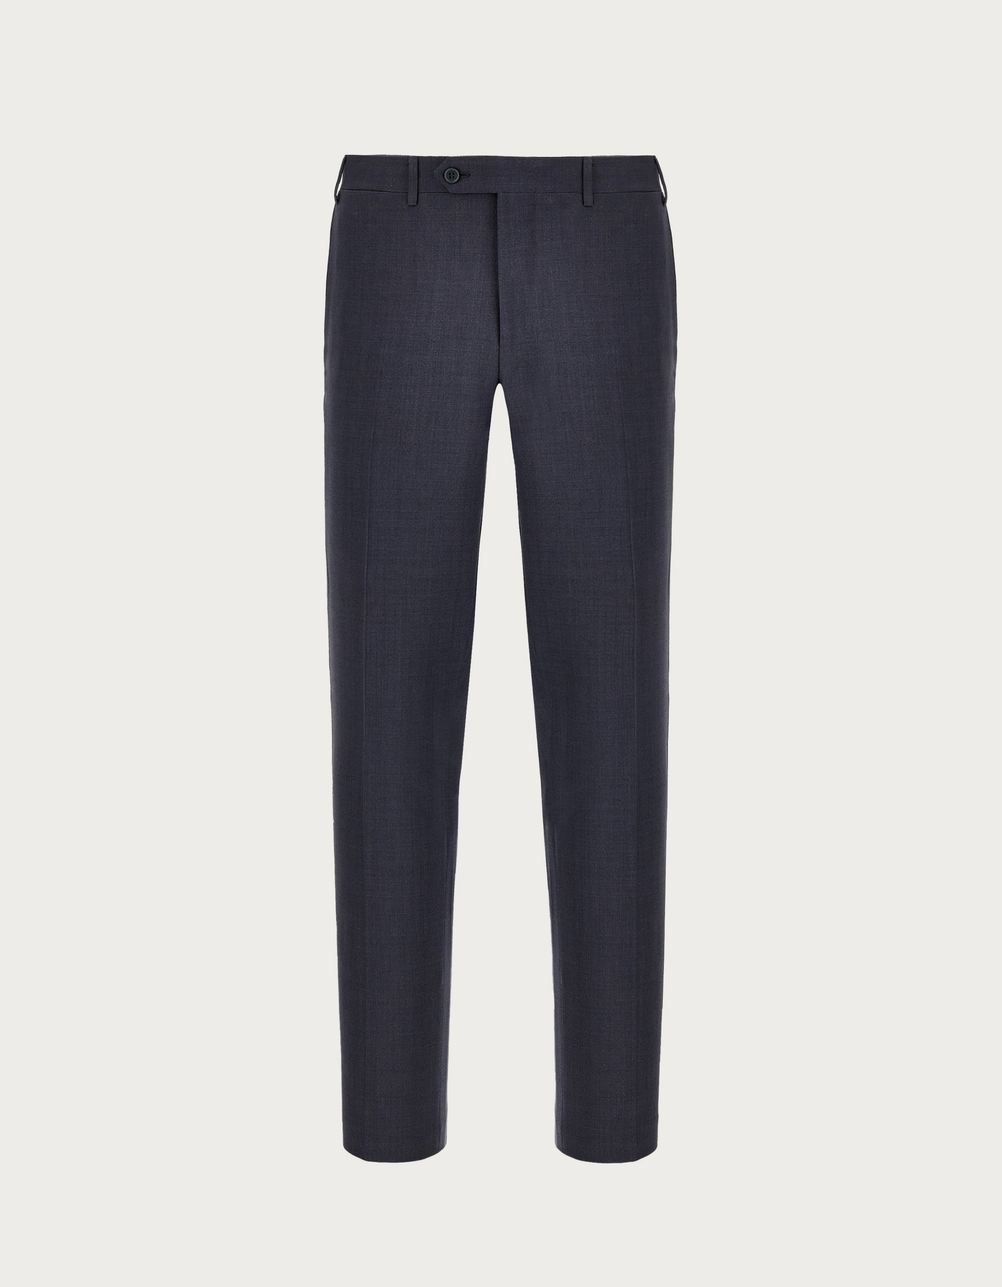 Impeccabile wool pants in grey